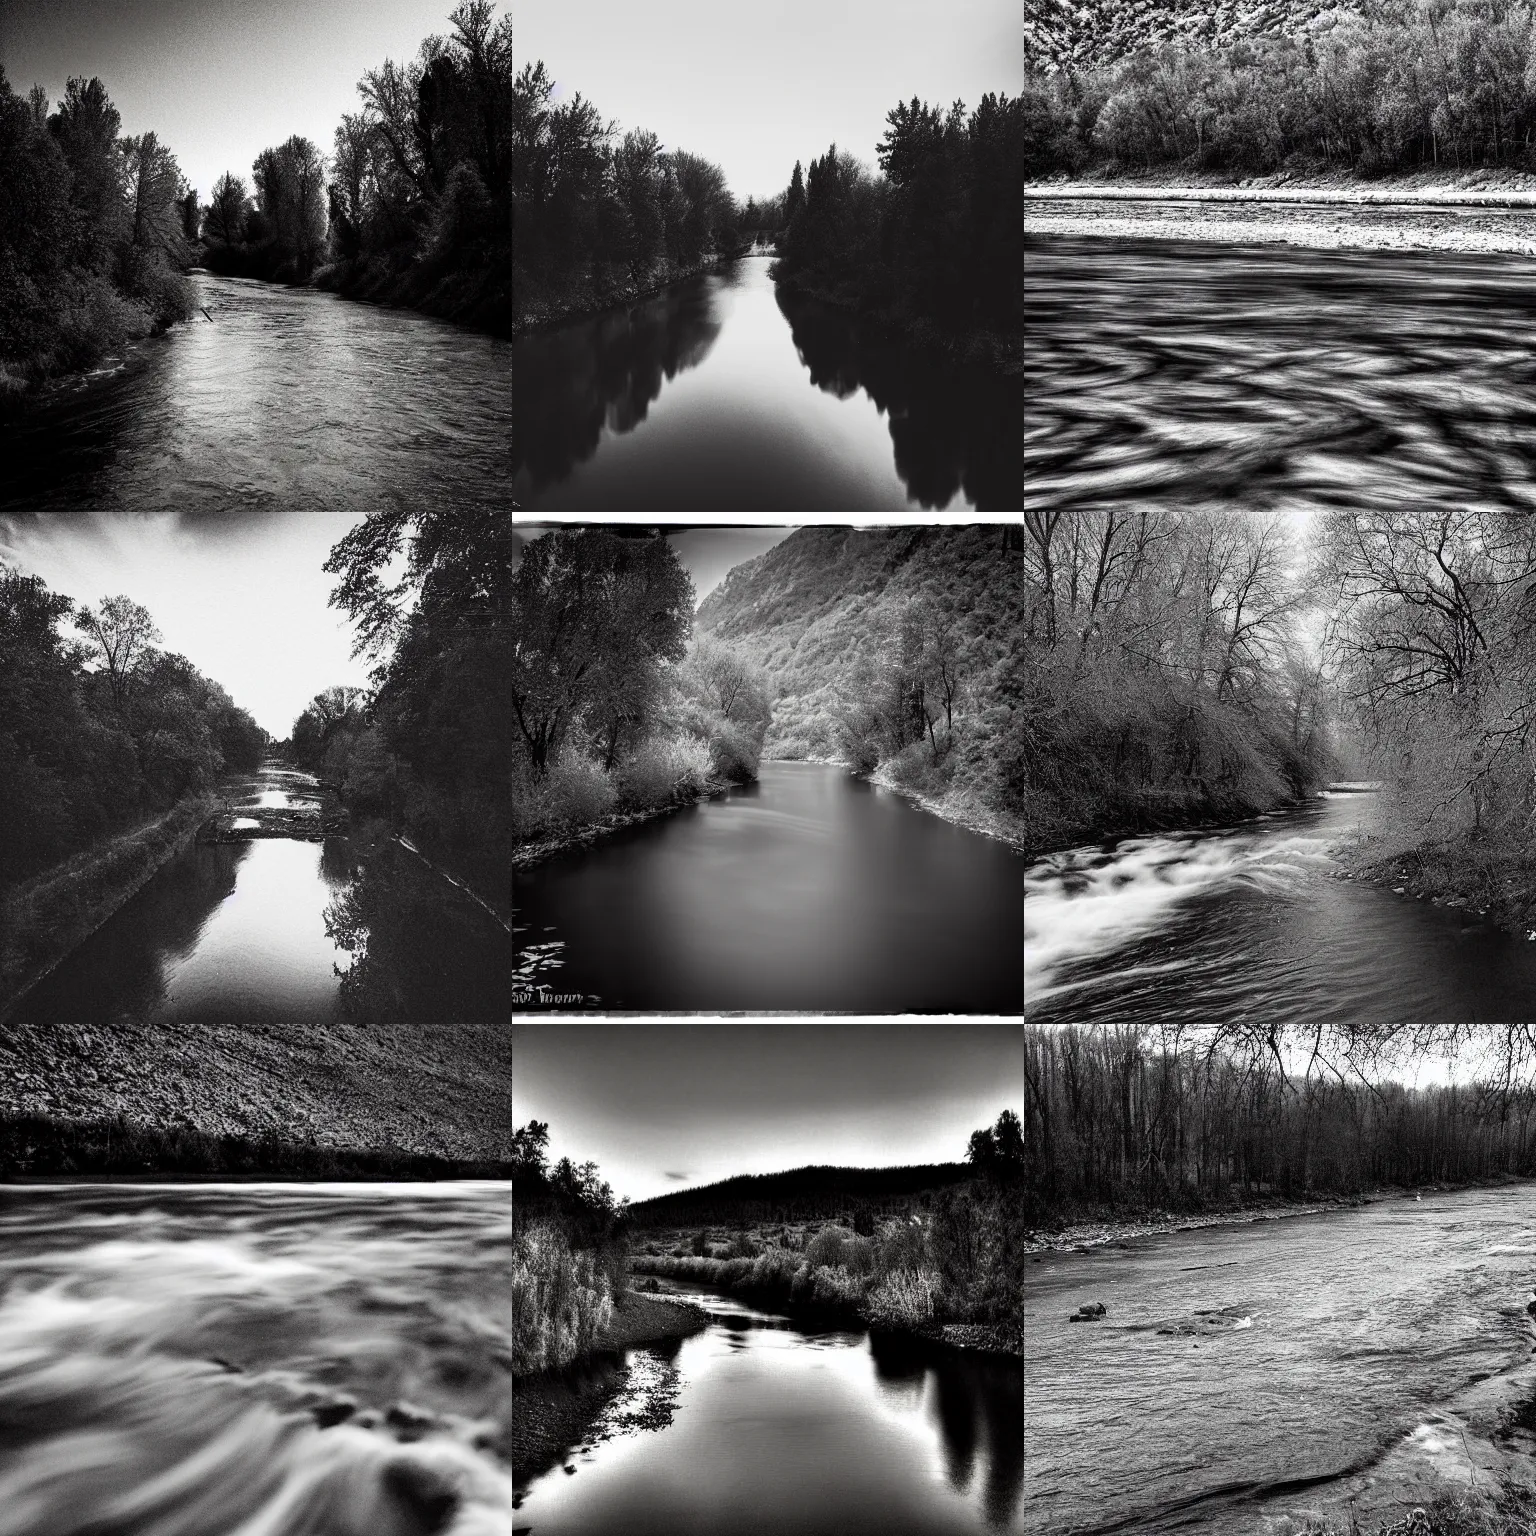 Prompt: еру river, a photo by beau brashares, high contrast and grainy